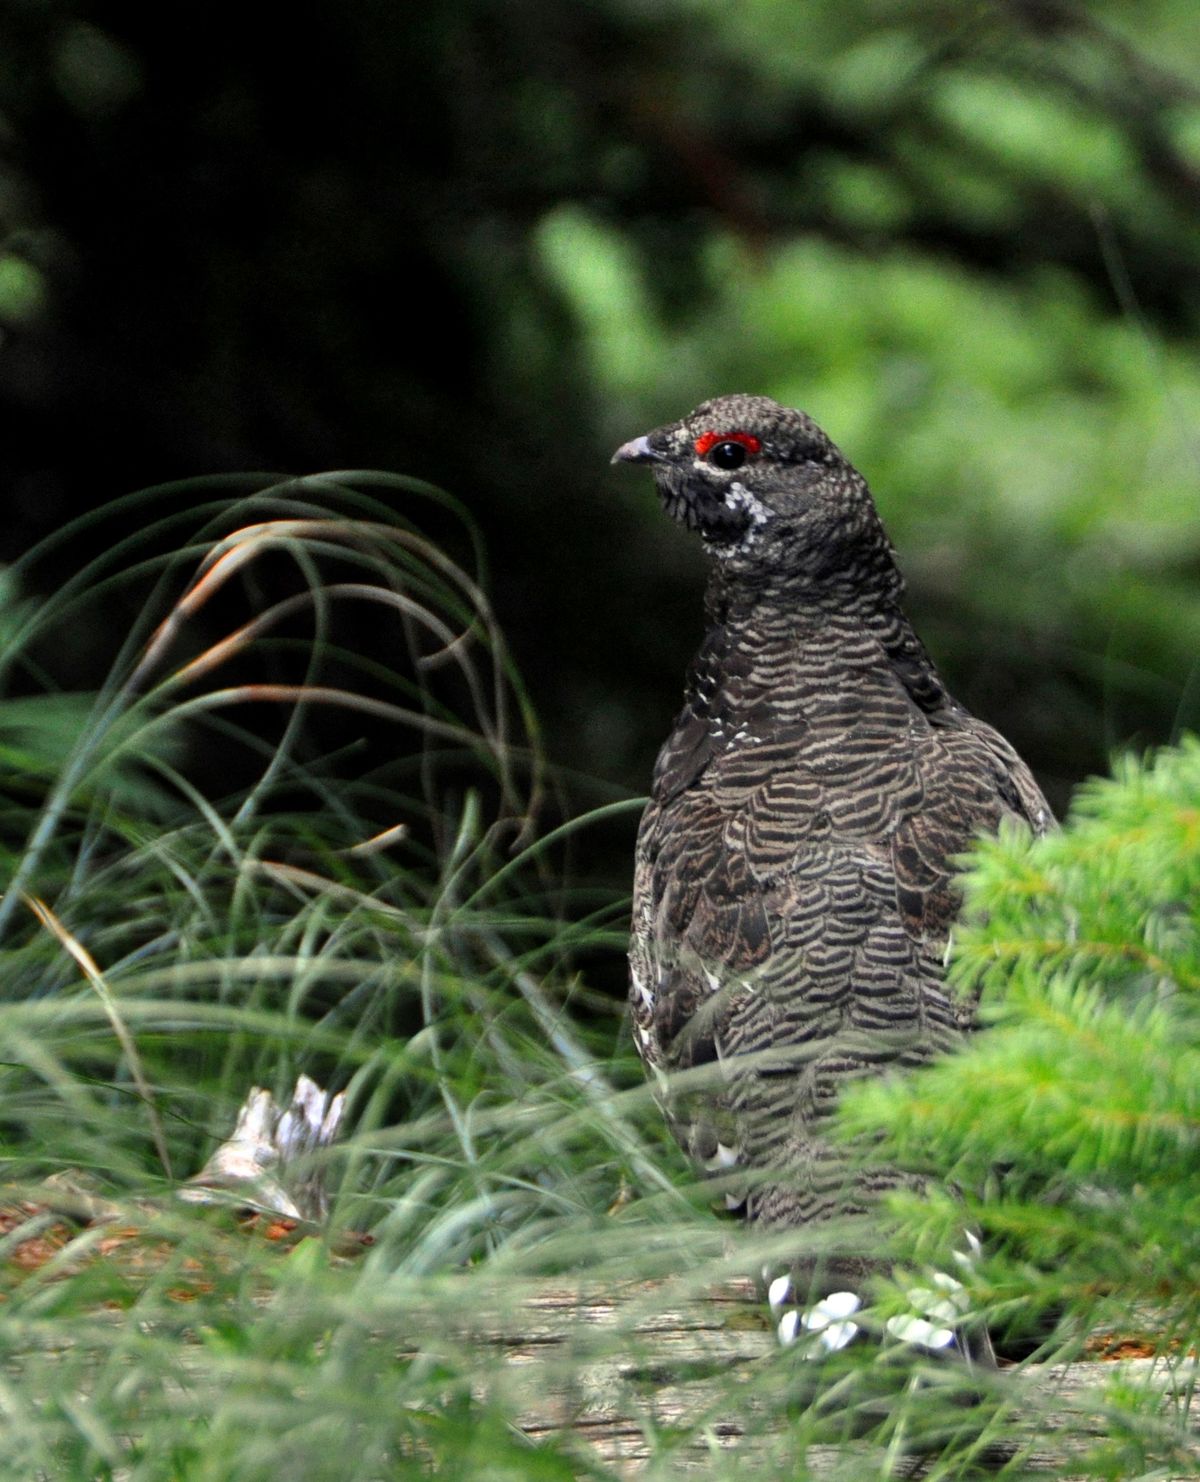 Proposals call for starting forest grouse seasons later in September with reduced limits. (Rich Landers)